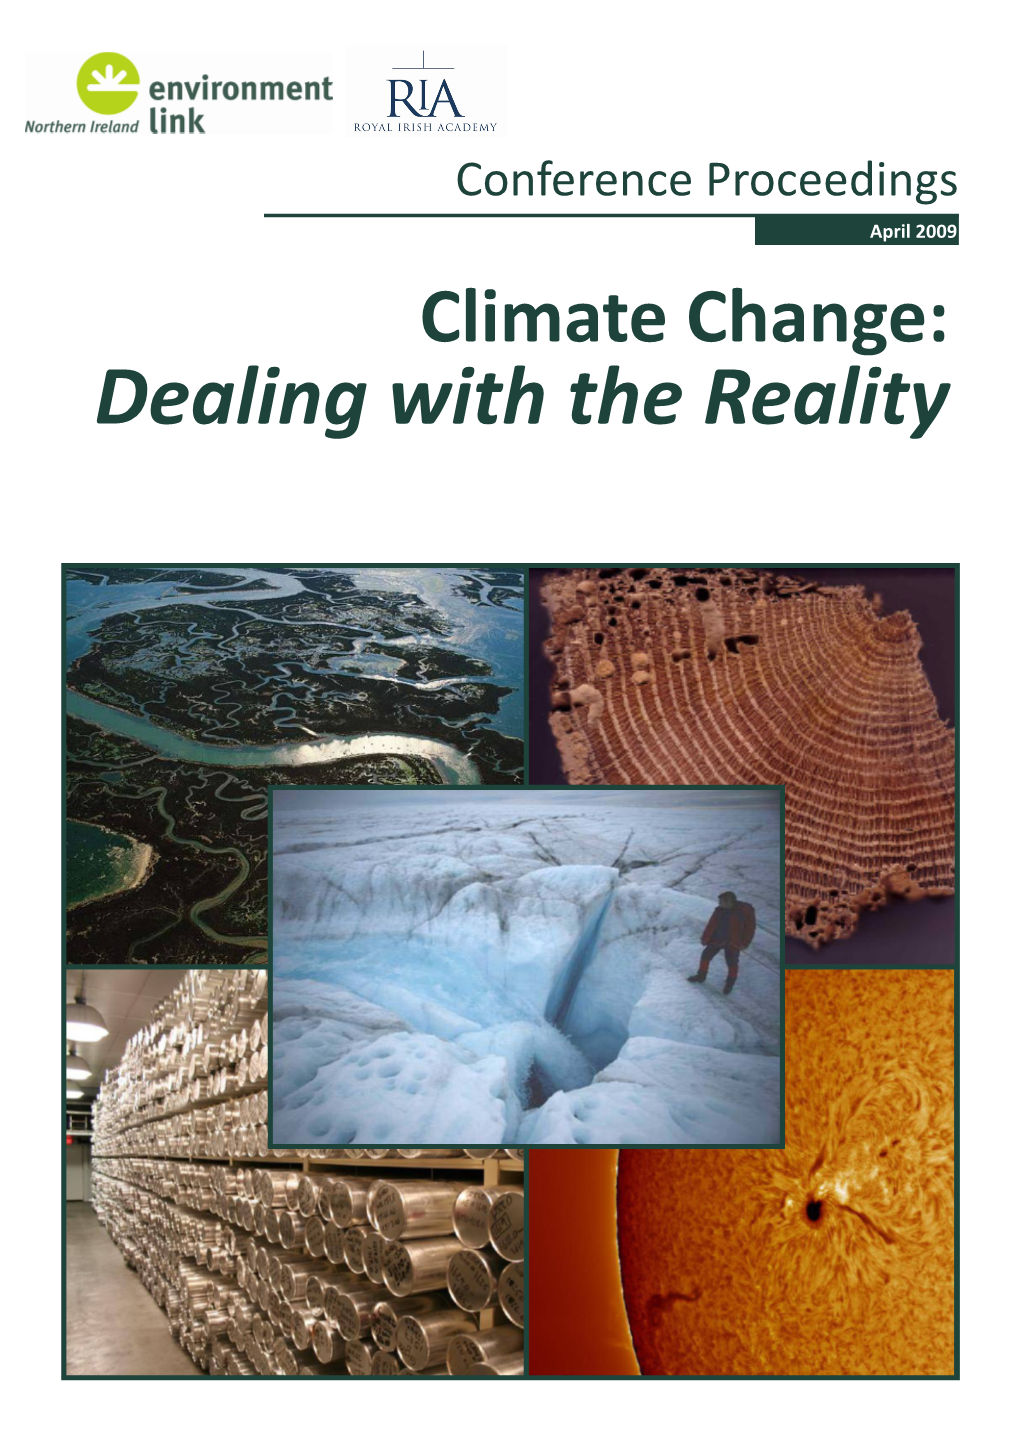 Dealing with the Reality NORTHERN IRELAND ENVIRONMENT LINK CONFERENCE REPORT Foreword